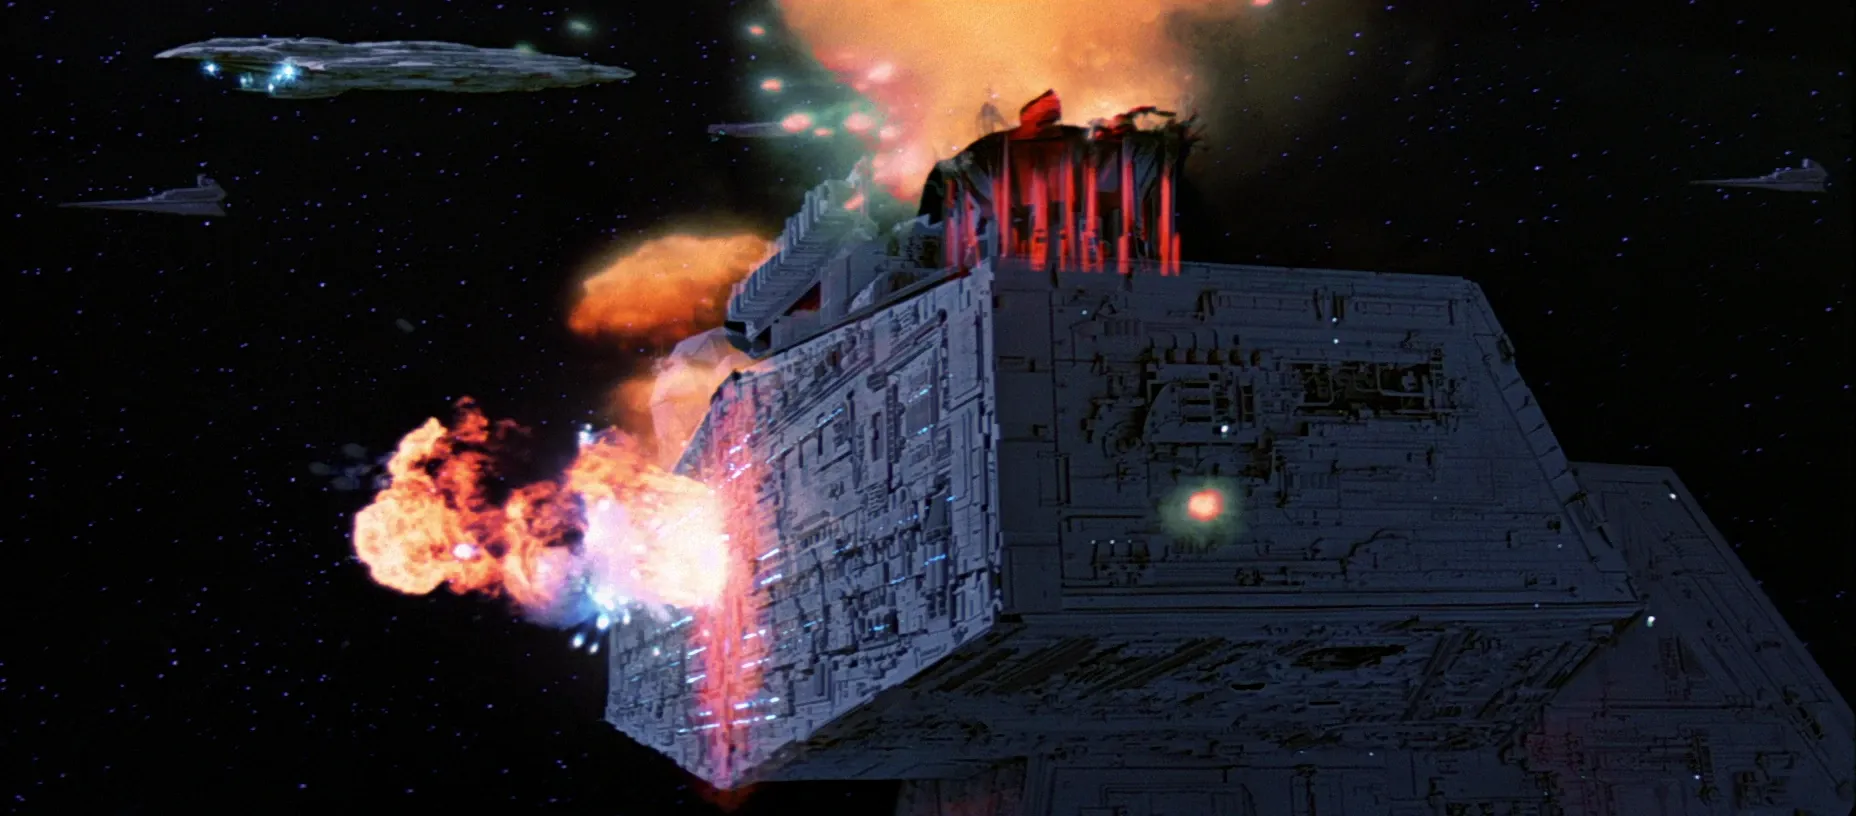 The bridge superstructure of the Executer is shown exploding.